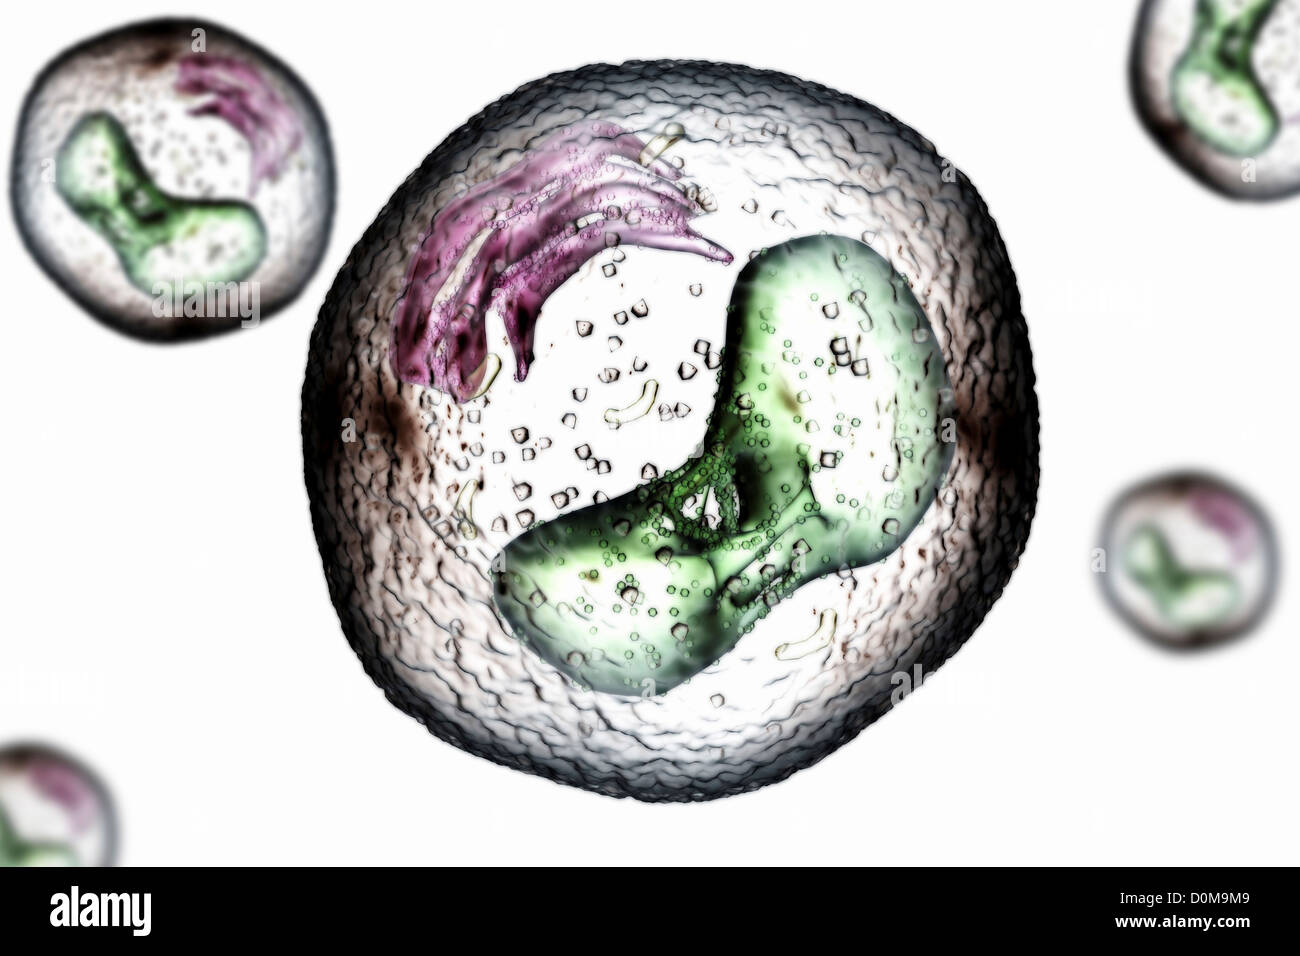 Structure of a typical human or animal cell. Stock Photo